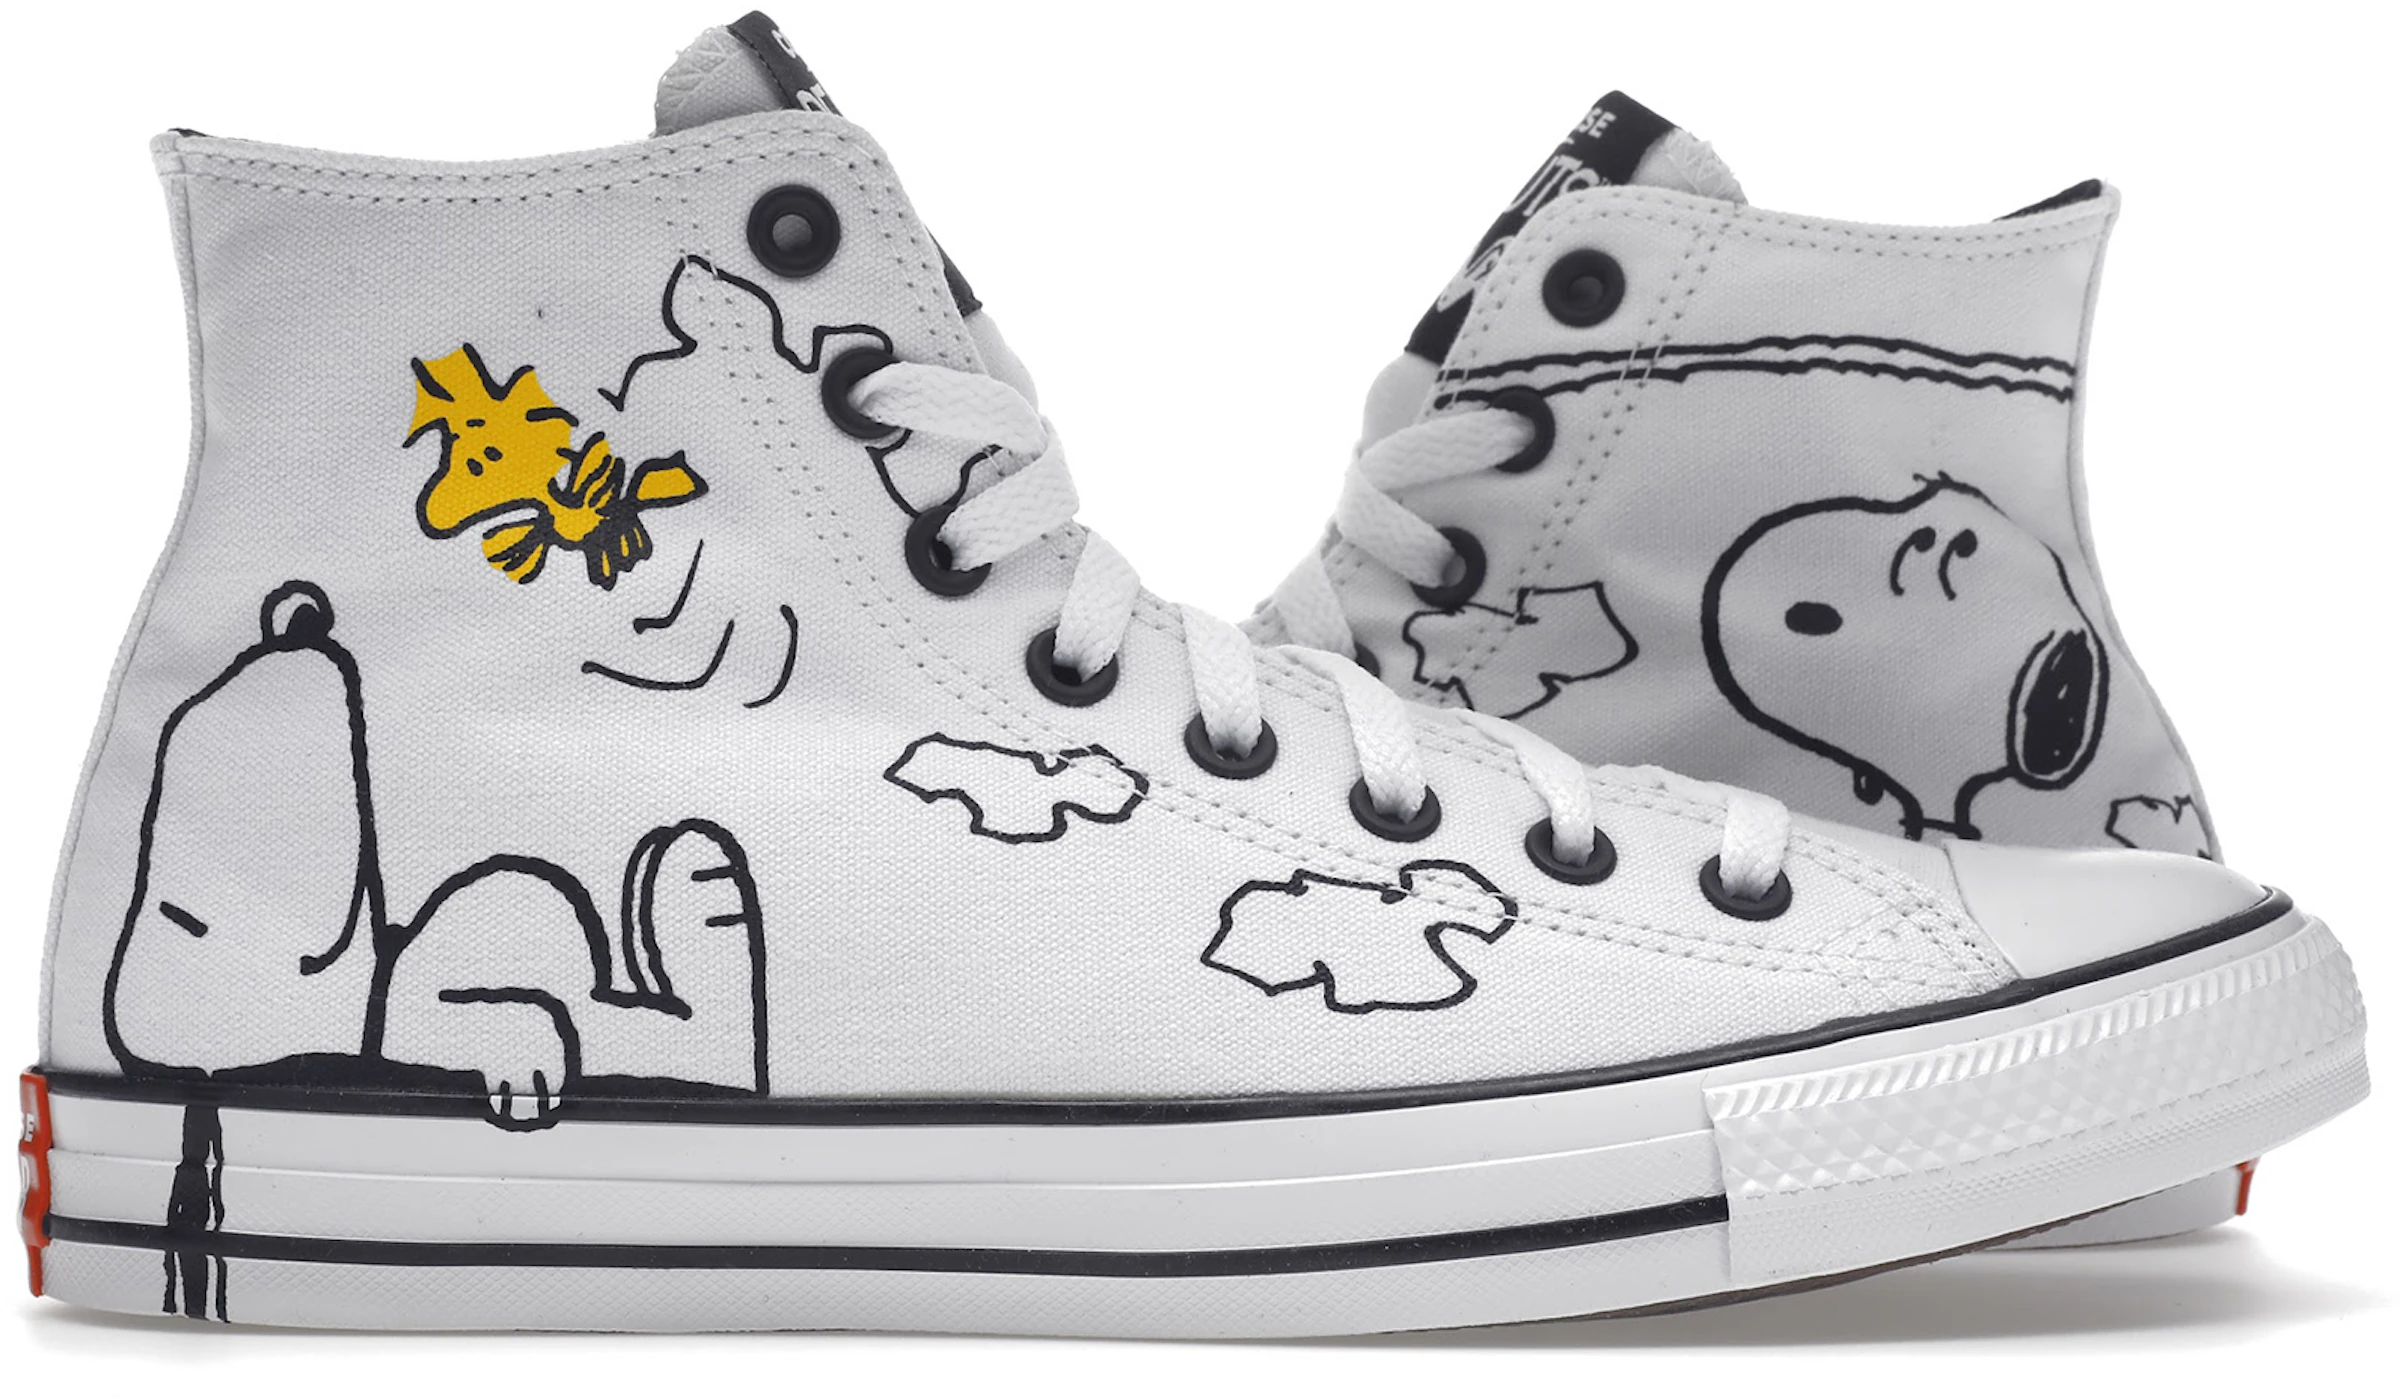 Converse Chuck Taylor All-Star Peanuts Snoopy and Woodstock -  A01872F/A01872C - US